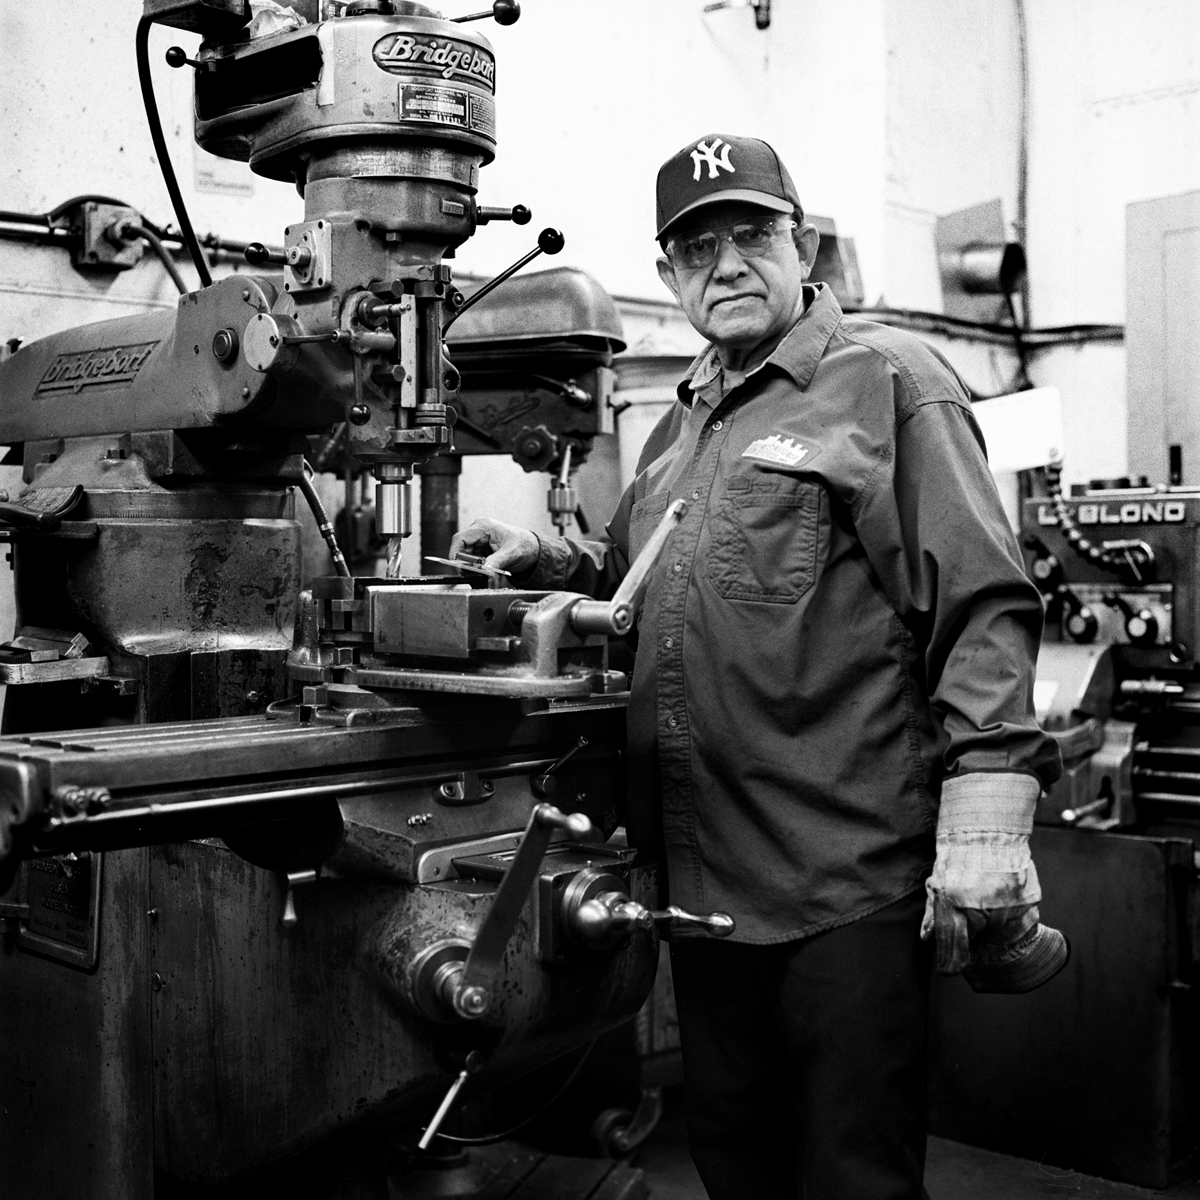  Mario, Reinforcing Supply’s shop machinist, by his driller. The machinery used at Reinforcing Supply are all built and maintained in house.  Williamsburg, Brooklyn, N.Y. (Nov. 2015) 